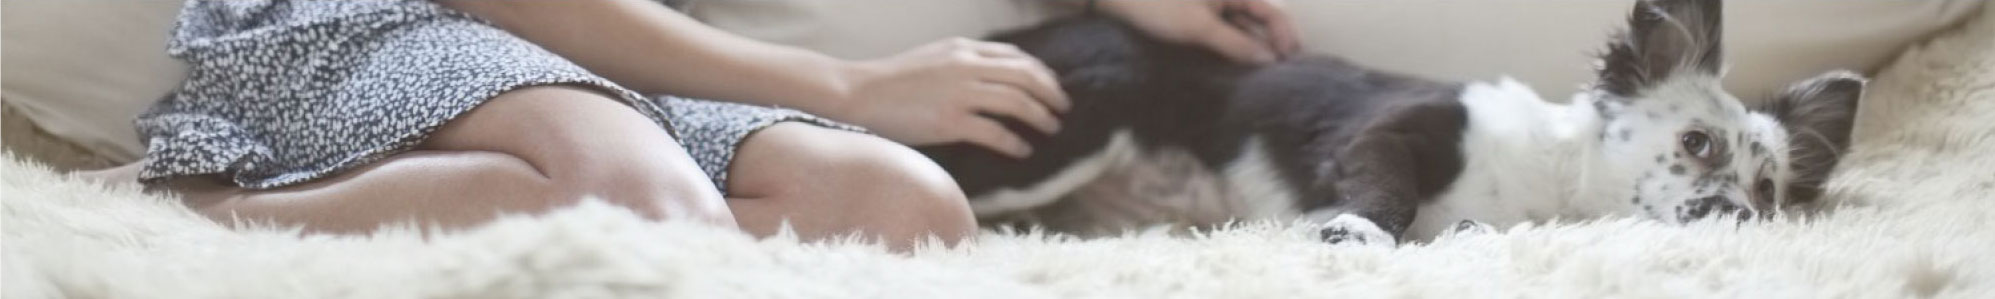 Girl and puppy sitting on a white shag-pile carpet